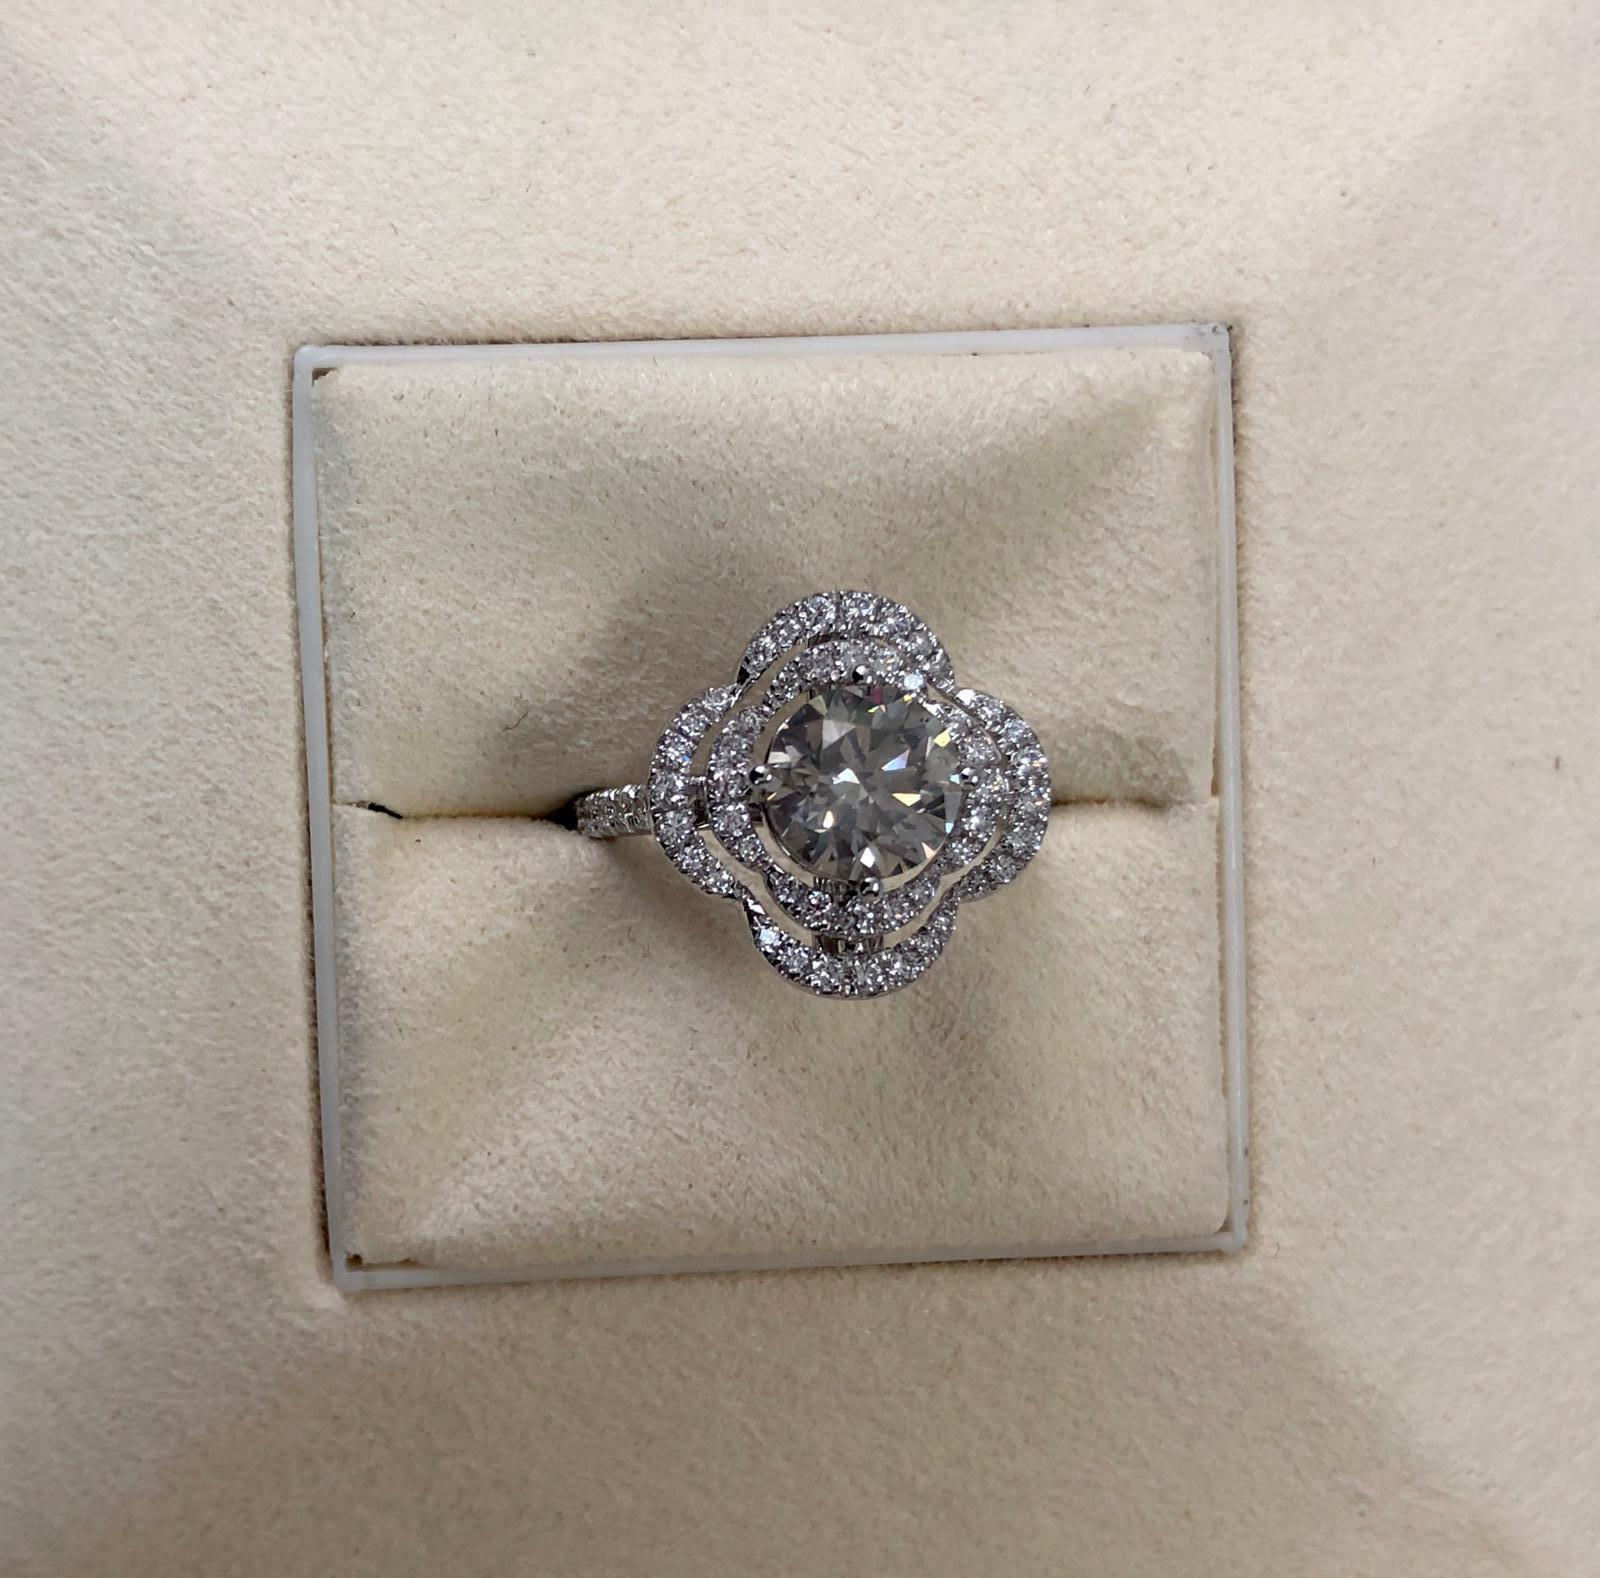 This is a fancy dark gray round natural diamond weighing 1.70 carats. surrounded by paved white diamonds in the flower shaped halo setting. Its transparency and luster are excellent. set on 18 karat white gold, this ring is the ultimate gift for